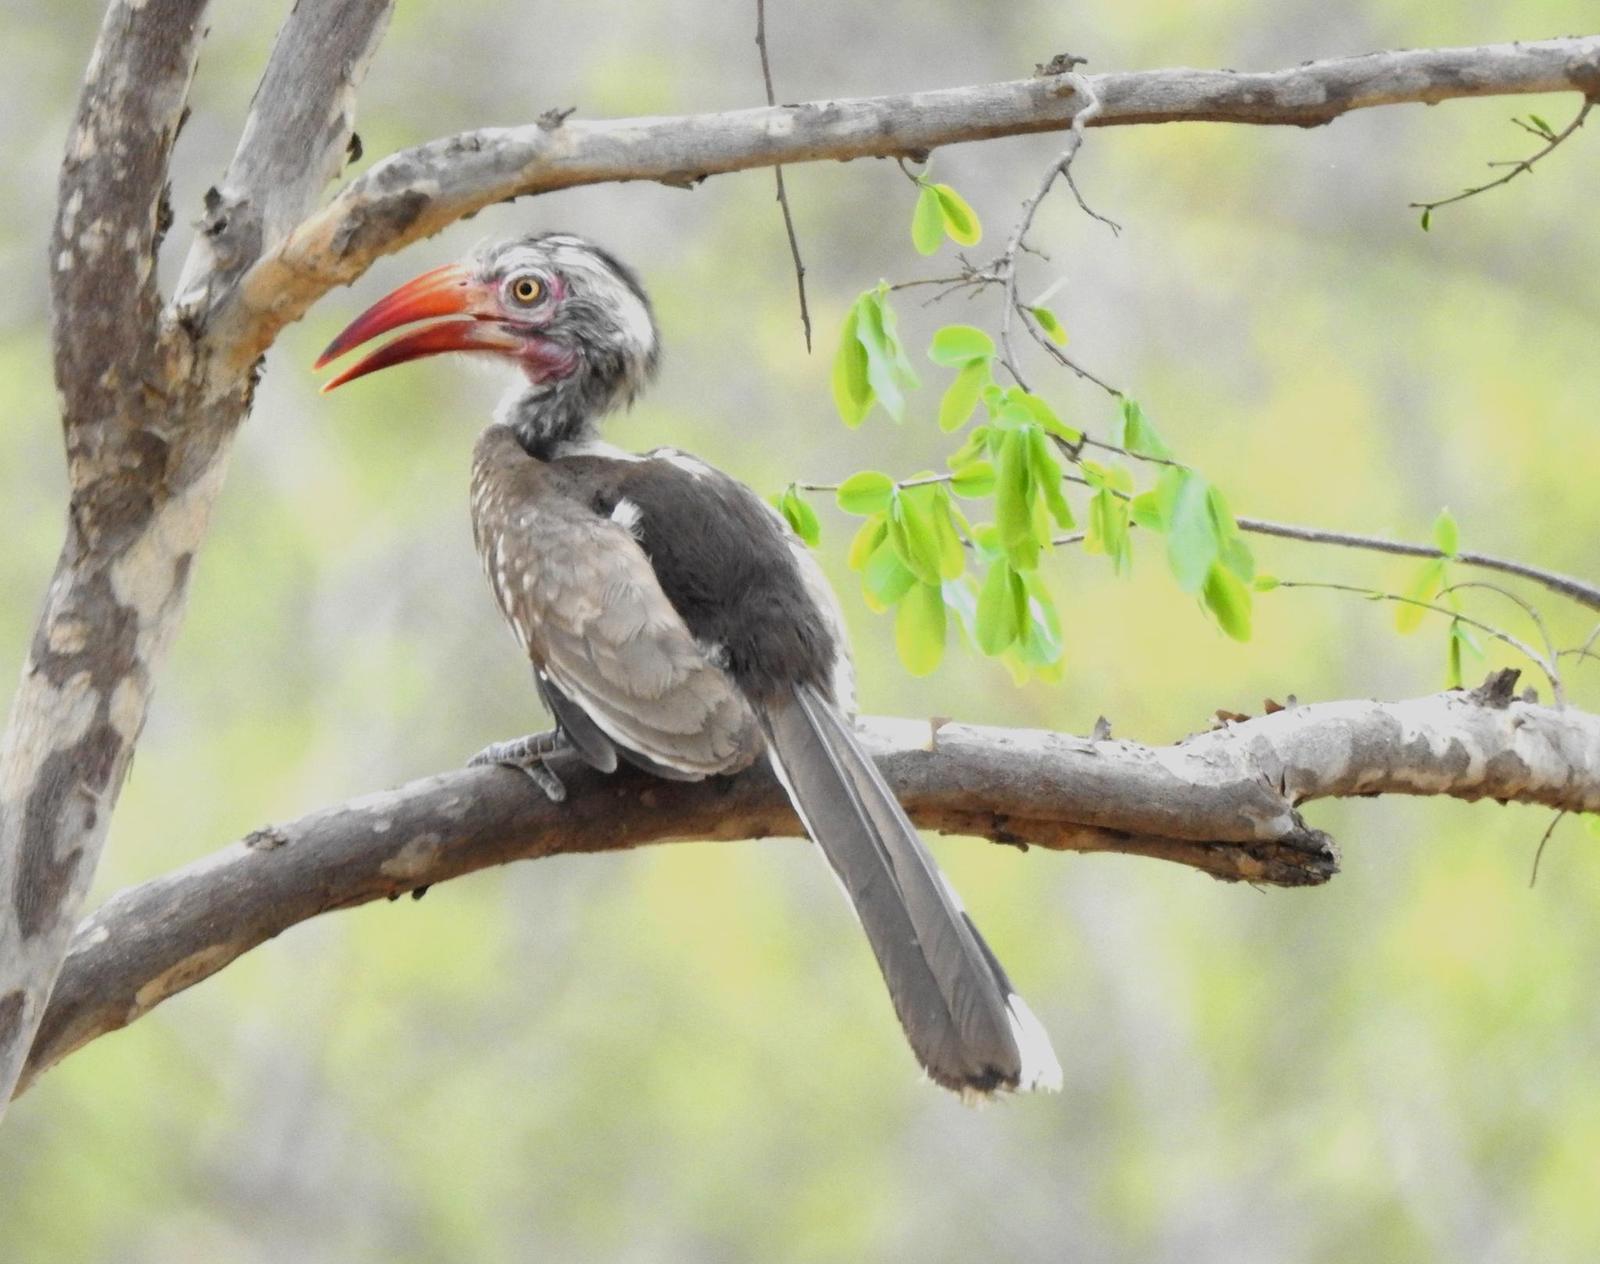 Southern Red-billed Hornbill Photo by Alysa Joaquin